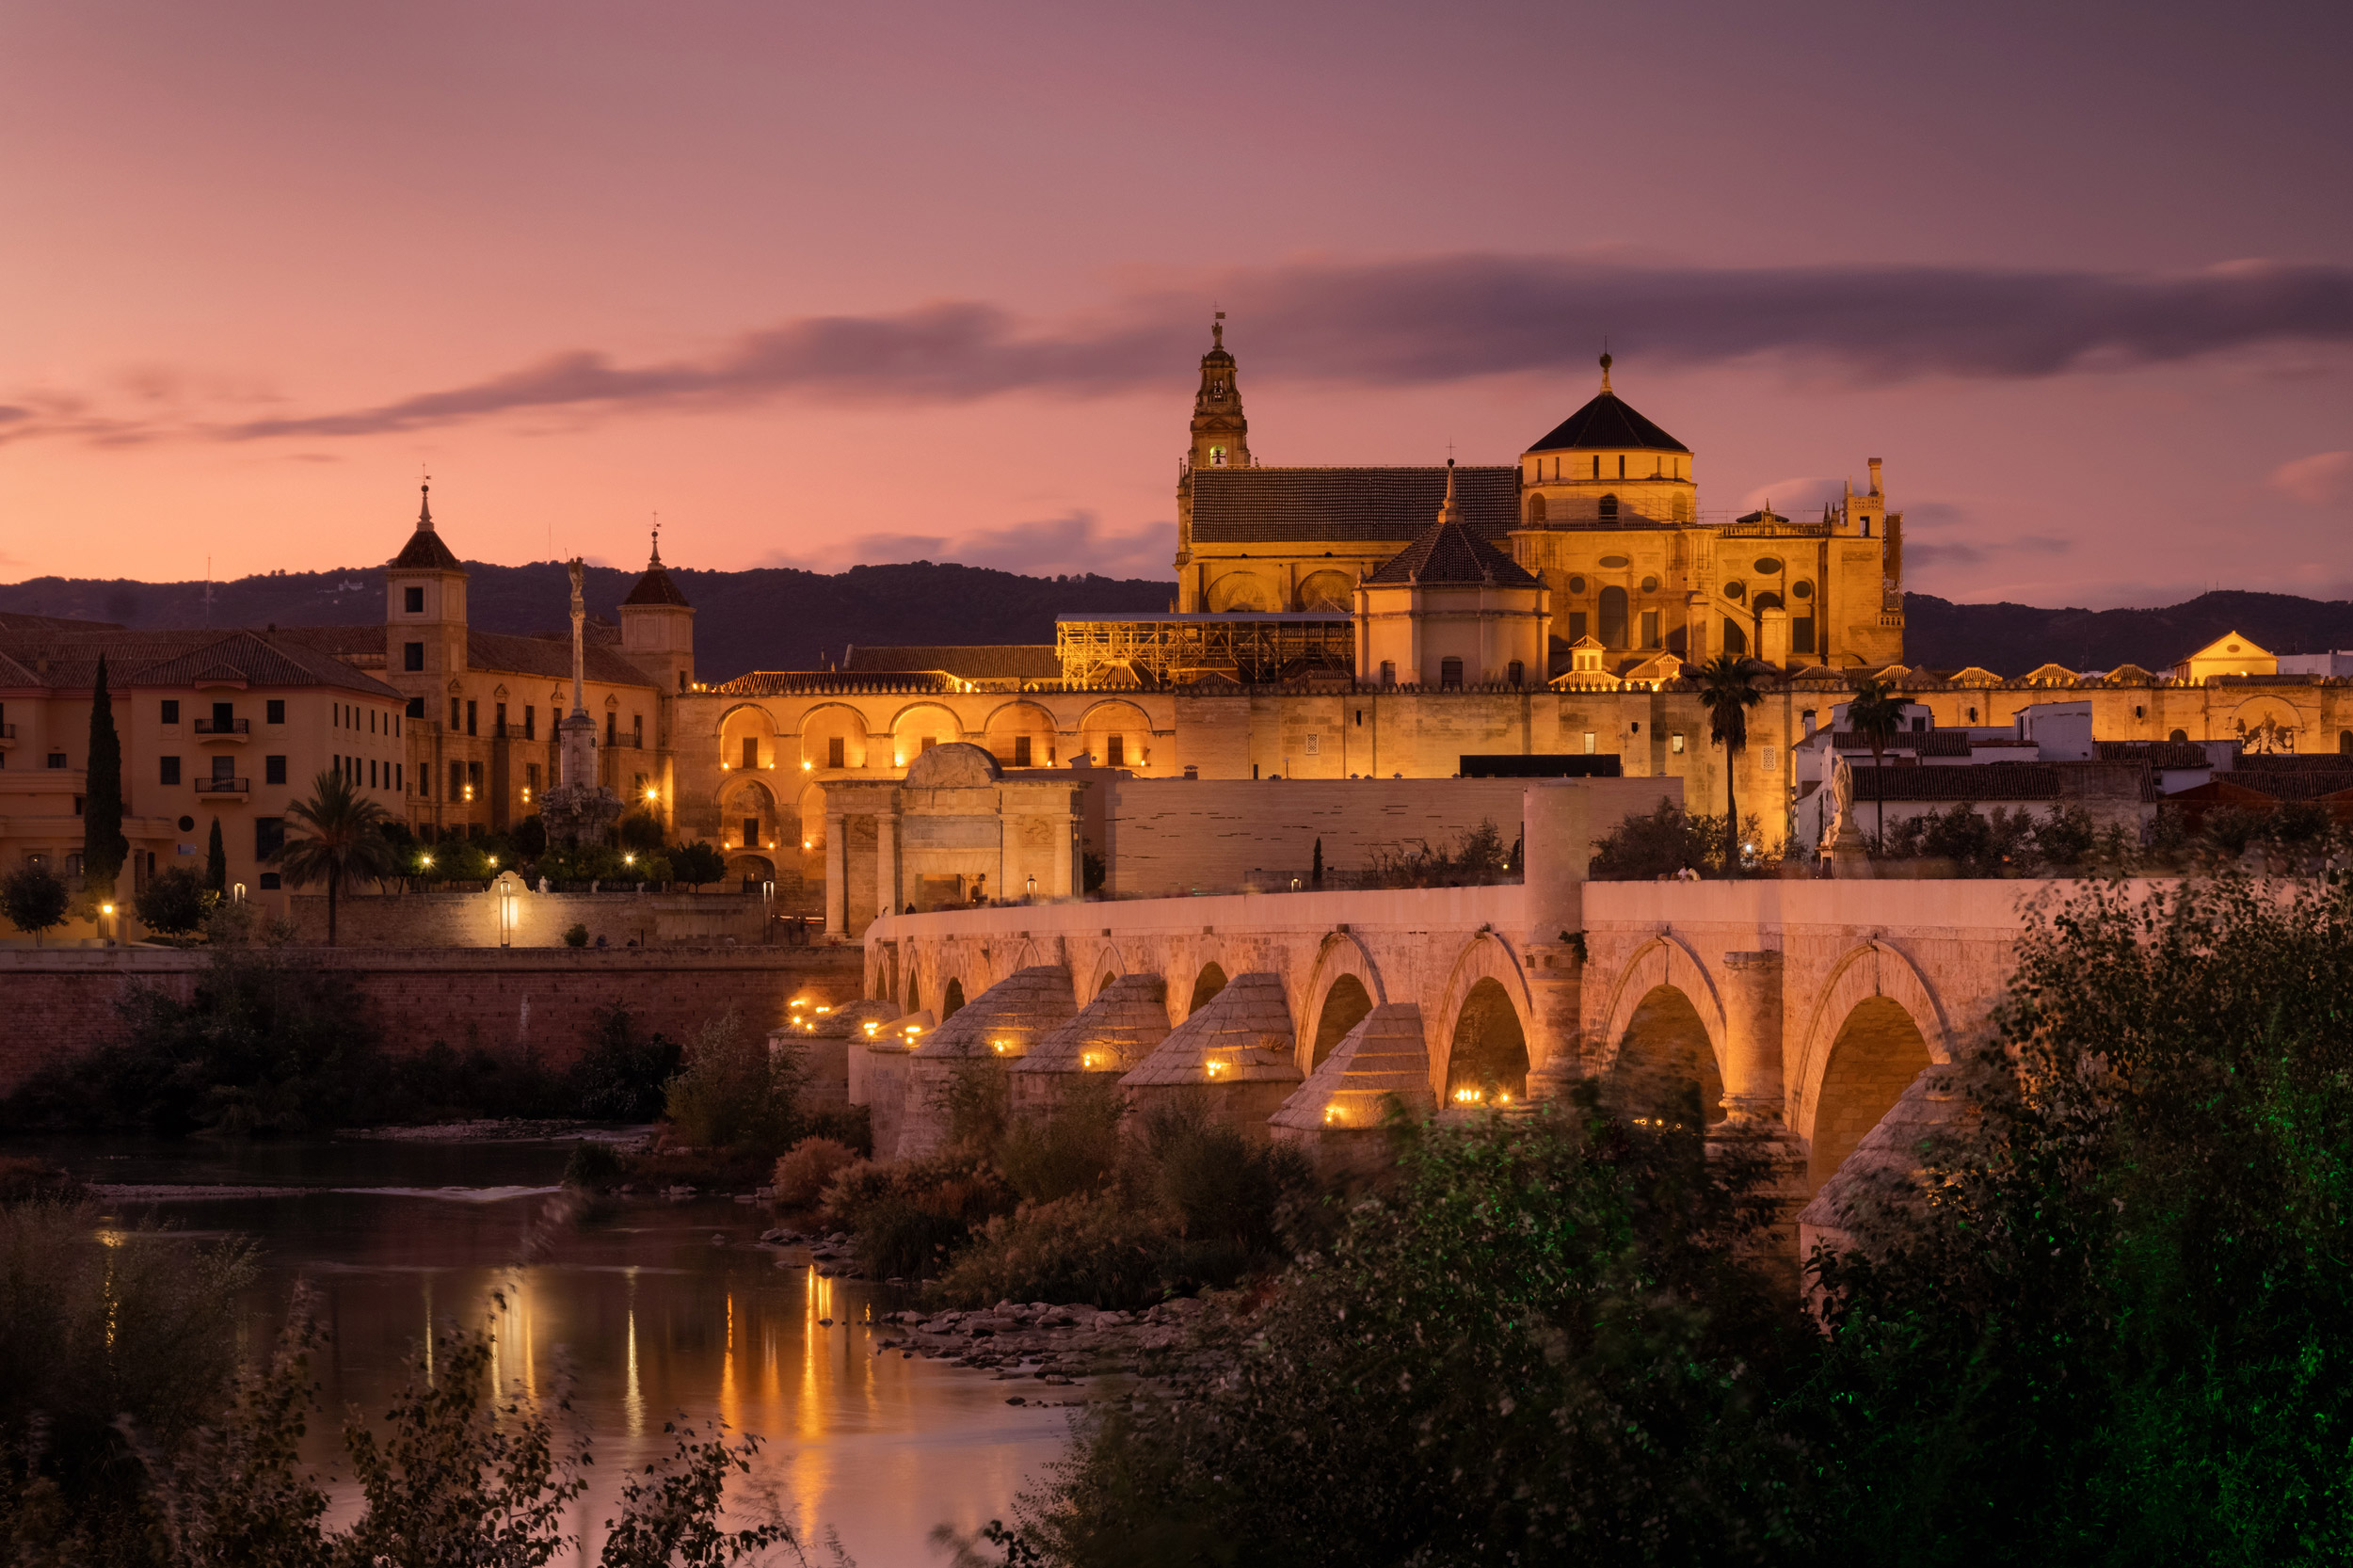 Roman Bridge and Guadalquivir river after the sunset, Great Mosq